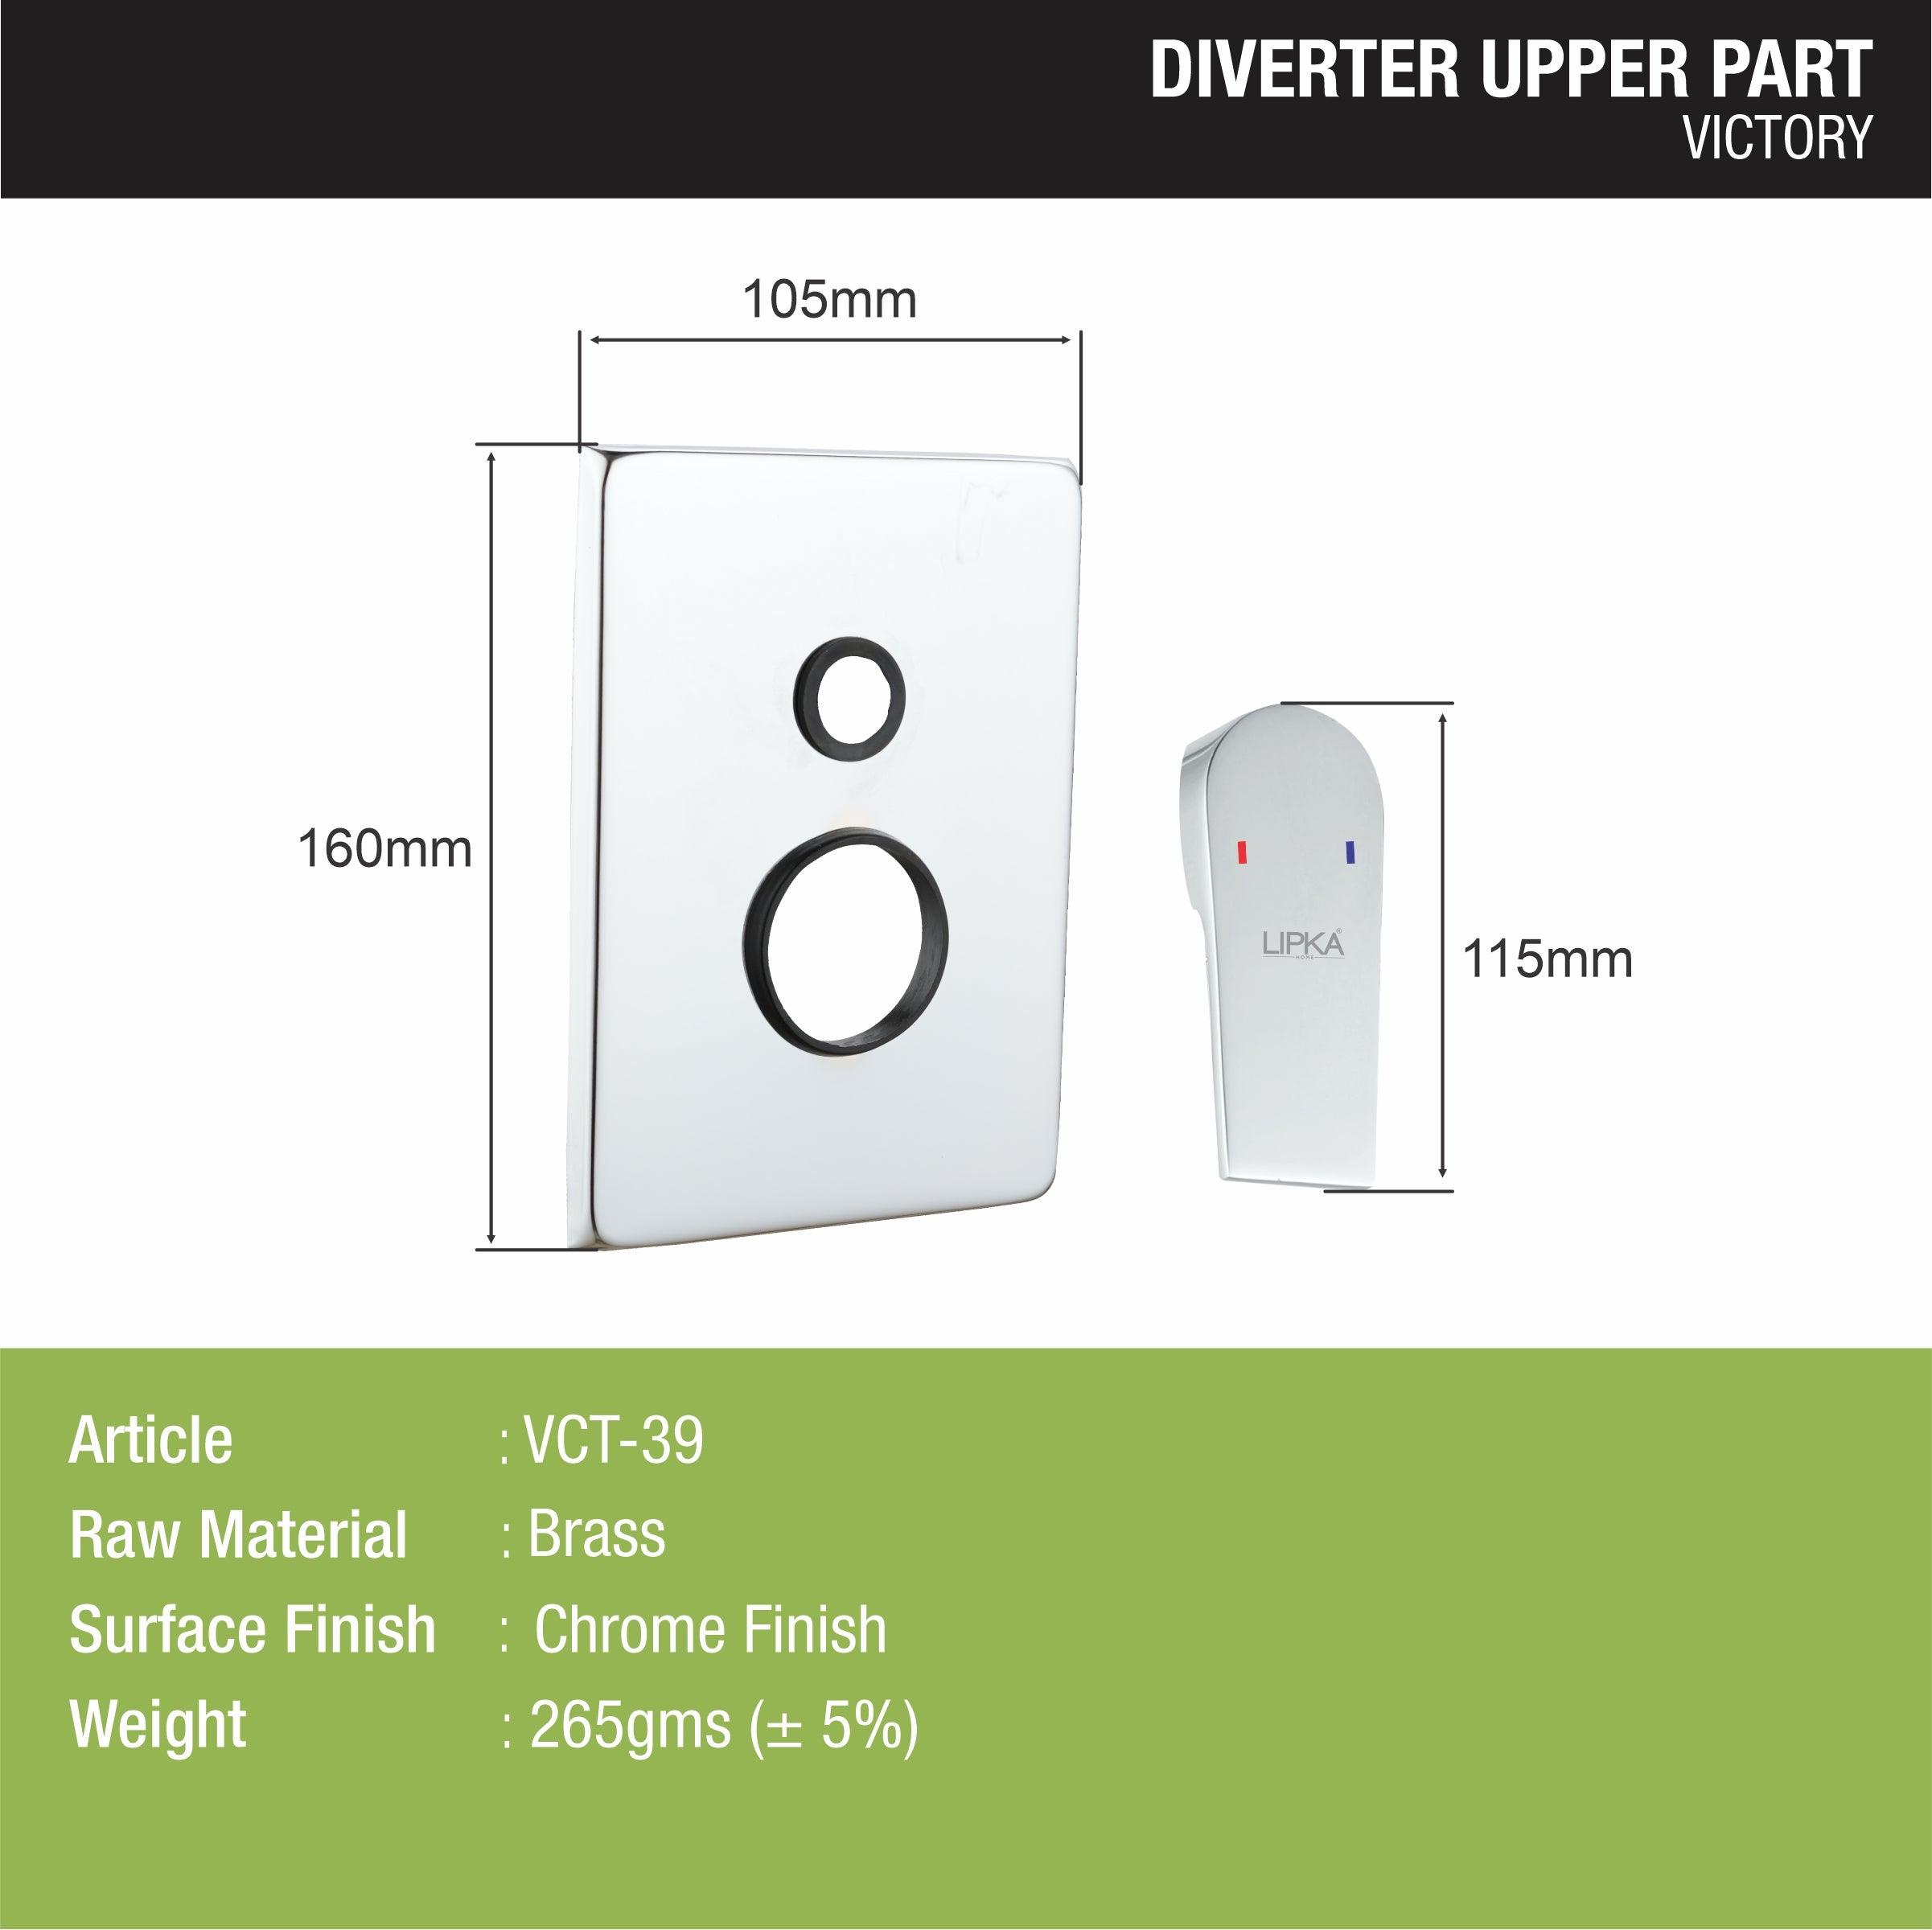 Victory Diverter (Upper Part) sizes and dimensions